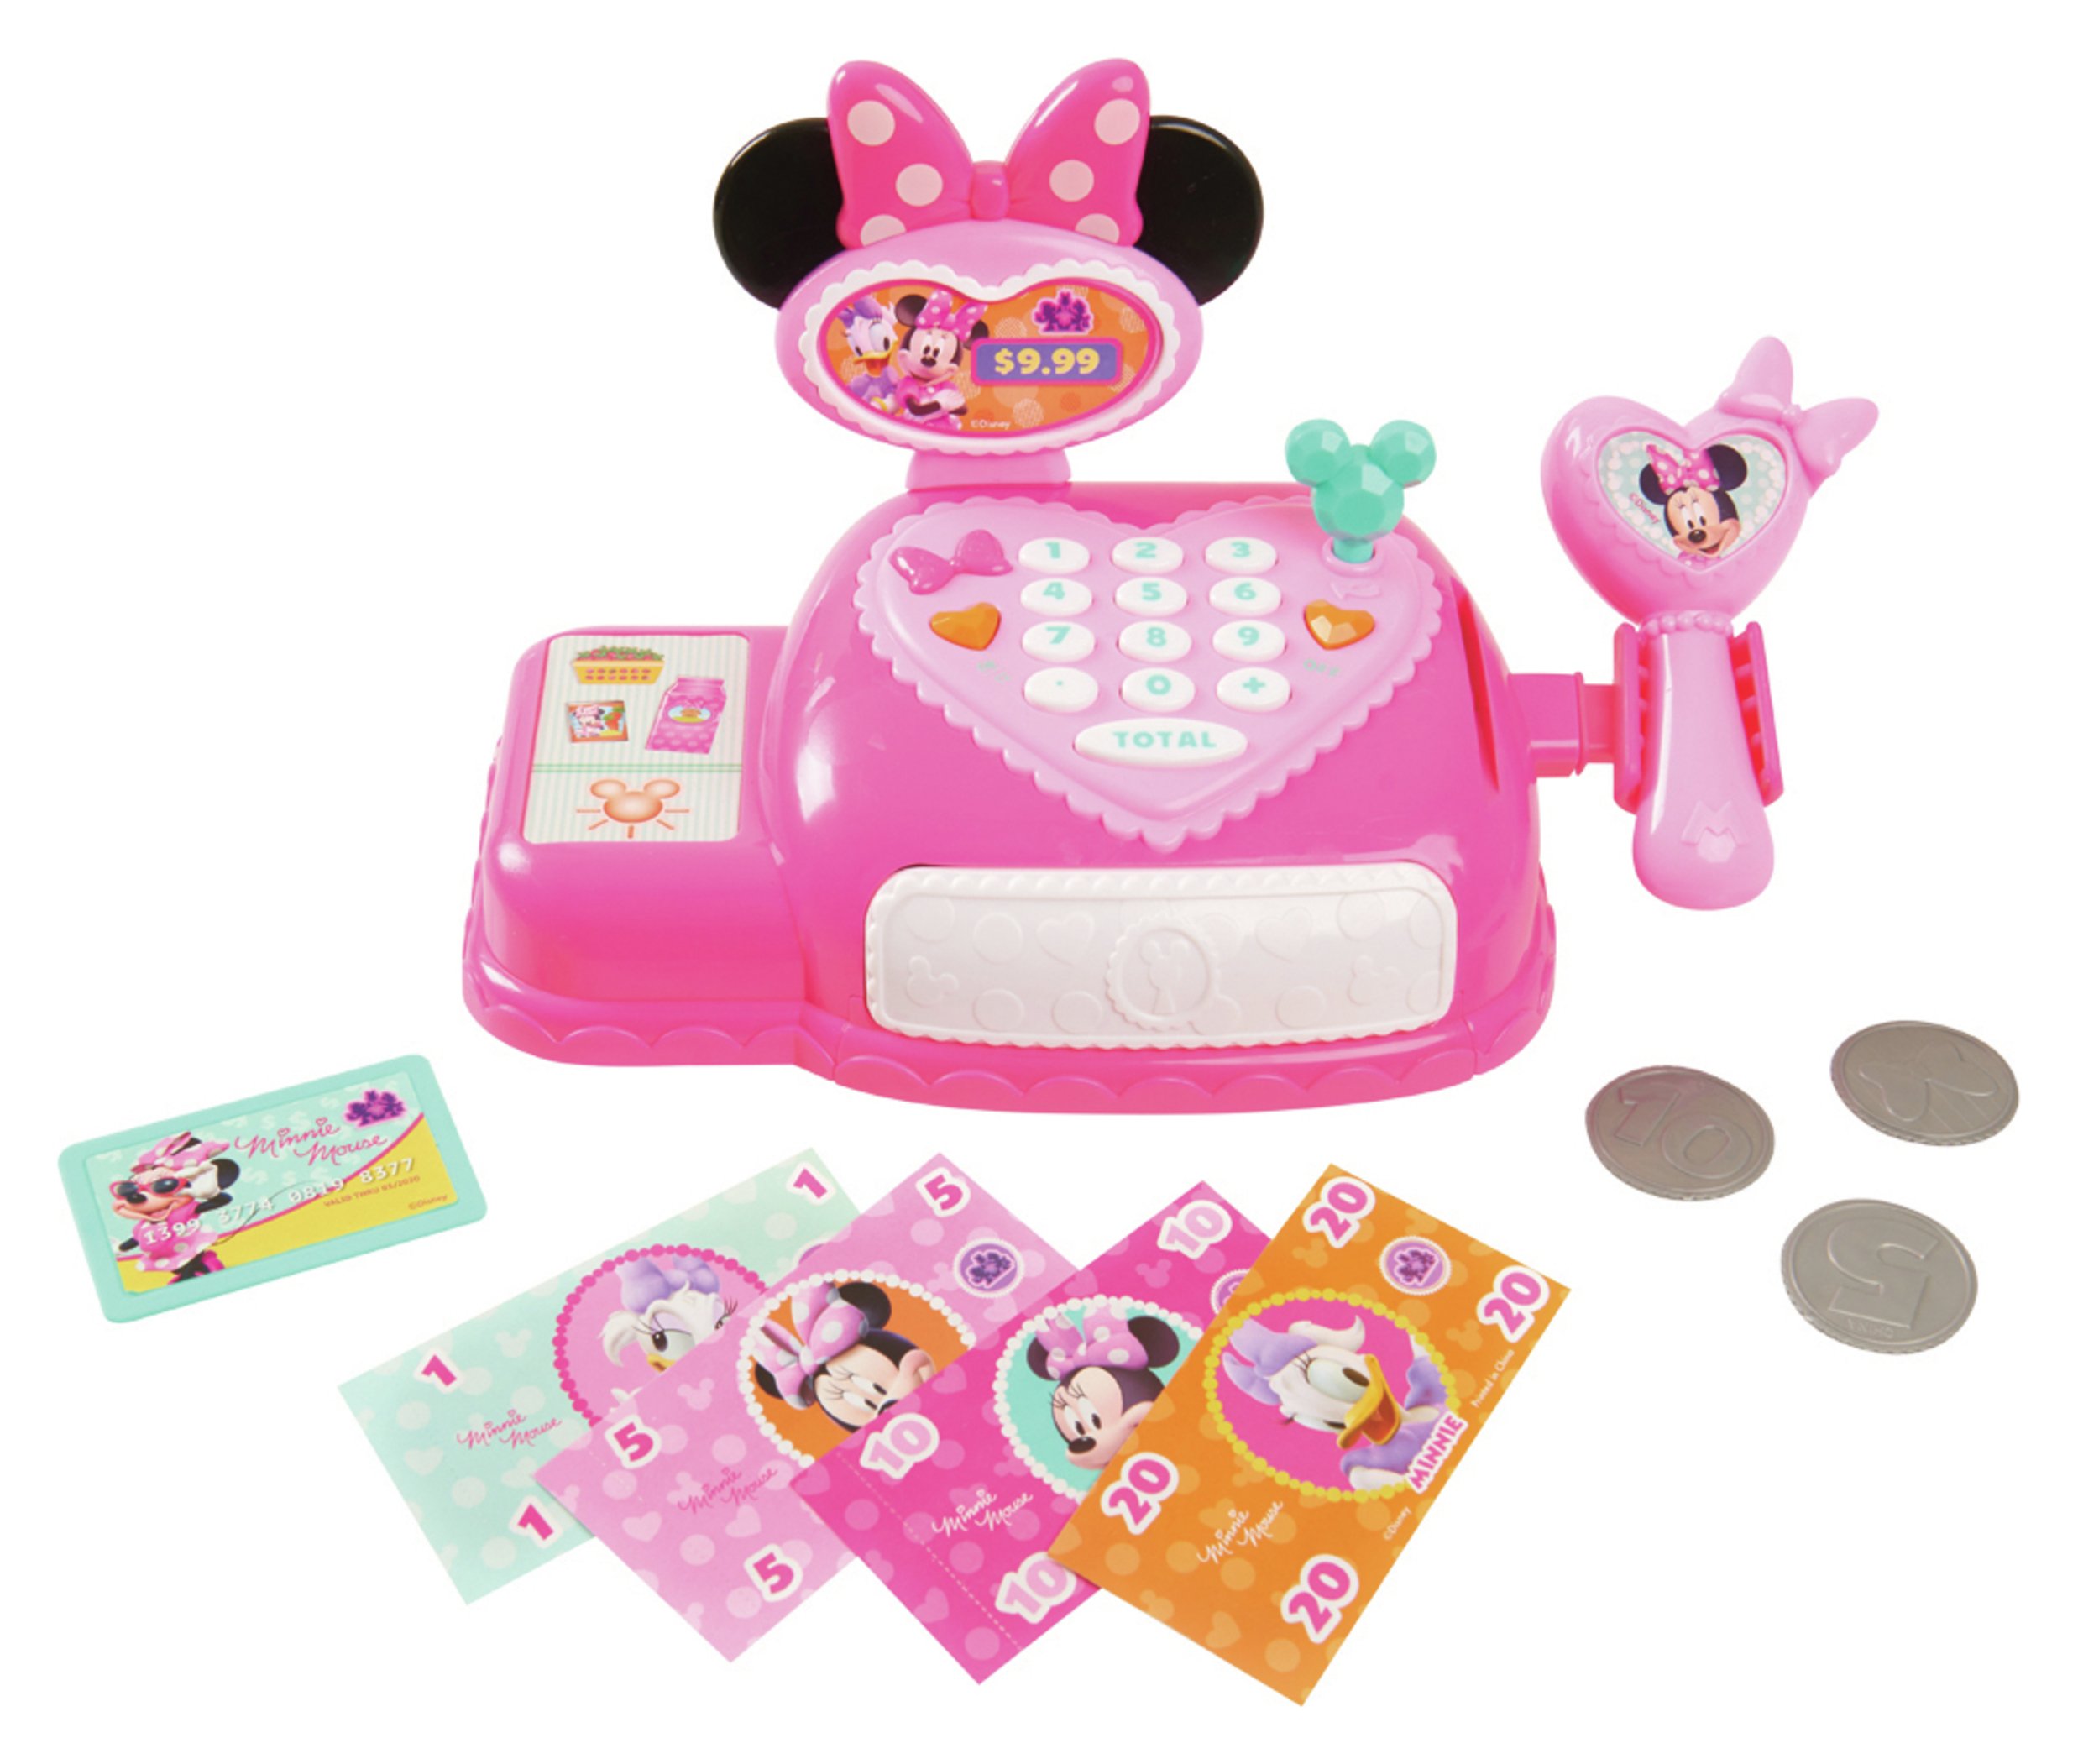 Mickey & Minnie Minnie Mouse's Boutique Cash Register.